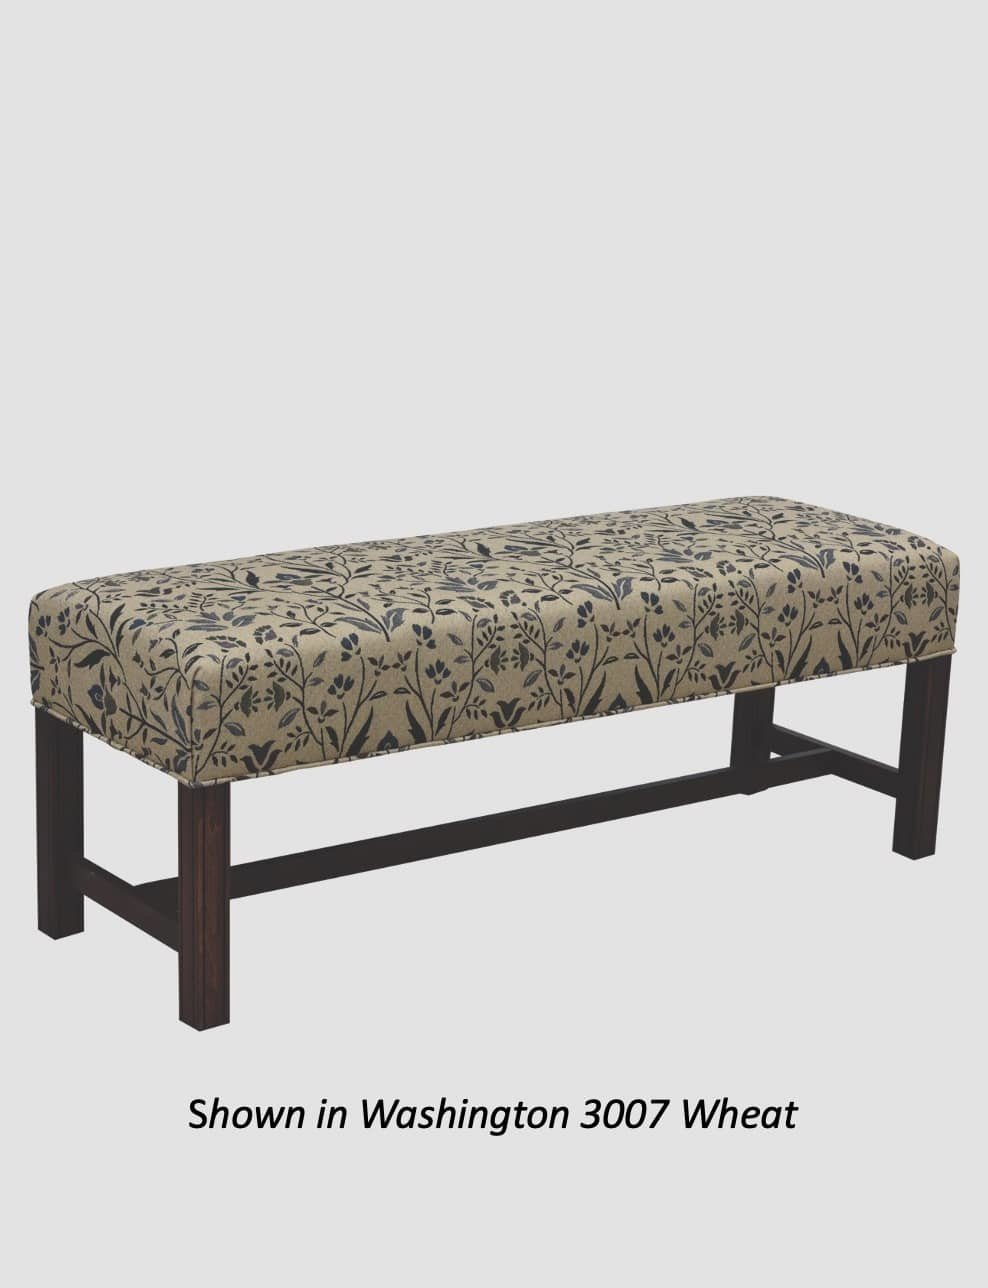 Town & Country Furnishings American Country Bench - 48" Brand: Town & Country Furnishings